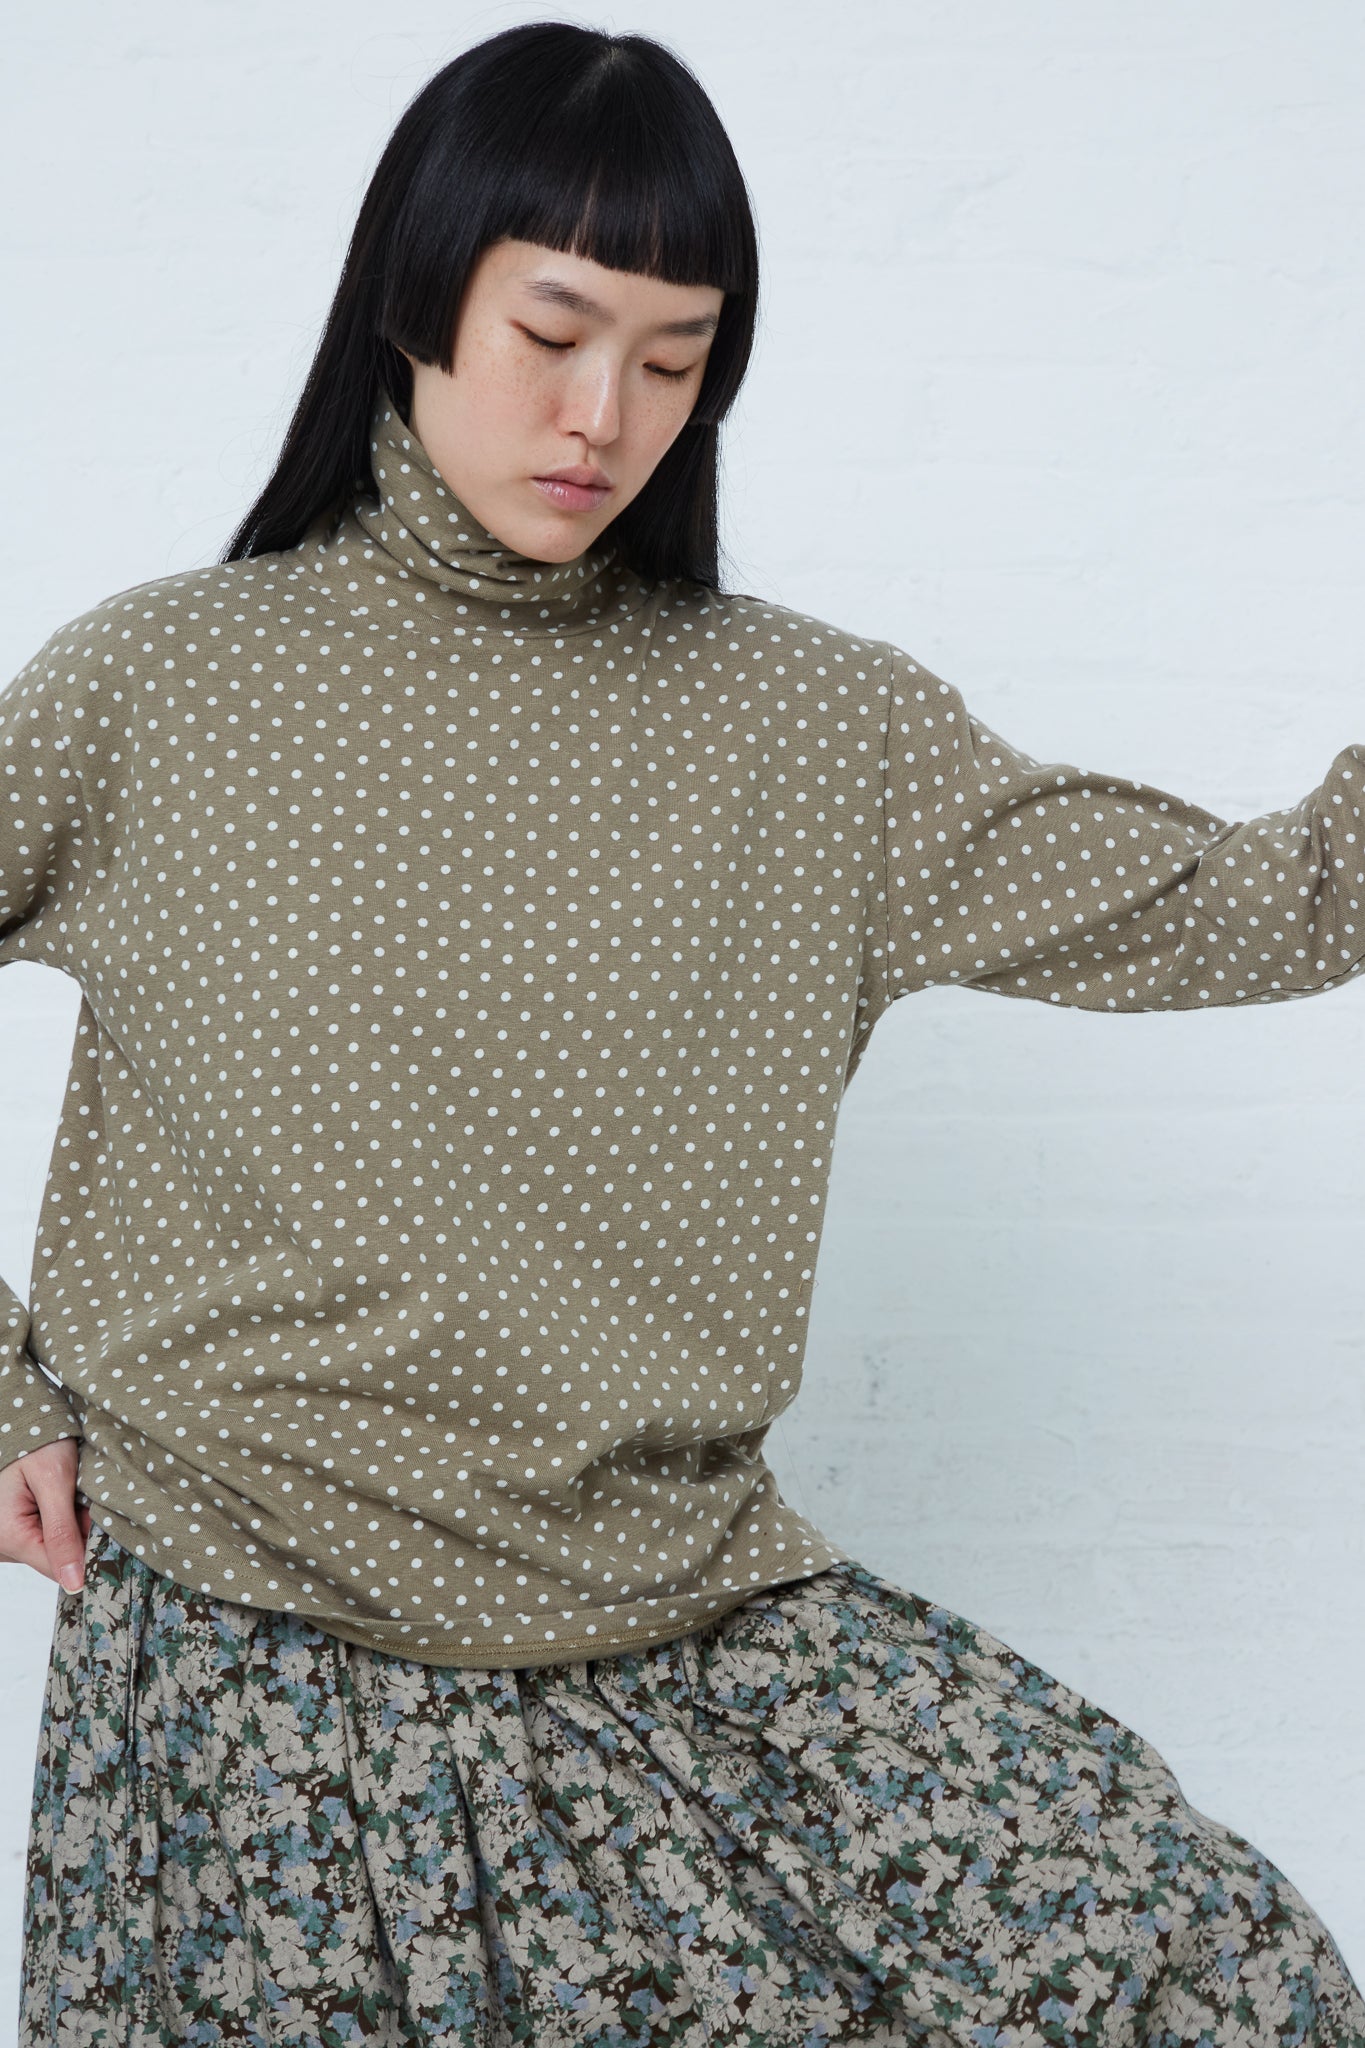 A woman wearing an Ichi Cotton Polka Dot Pullover Turtleneck in Khaki and floral skirt.